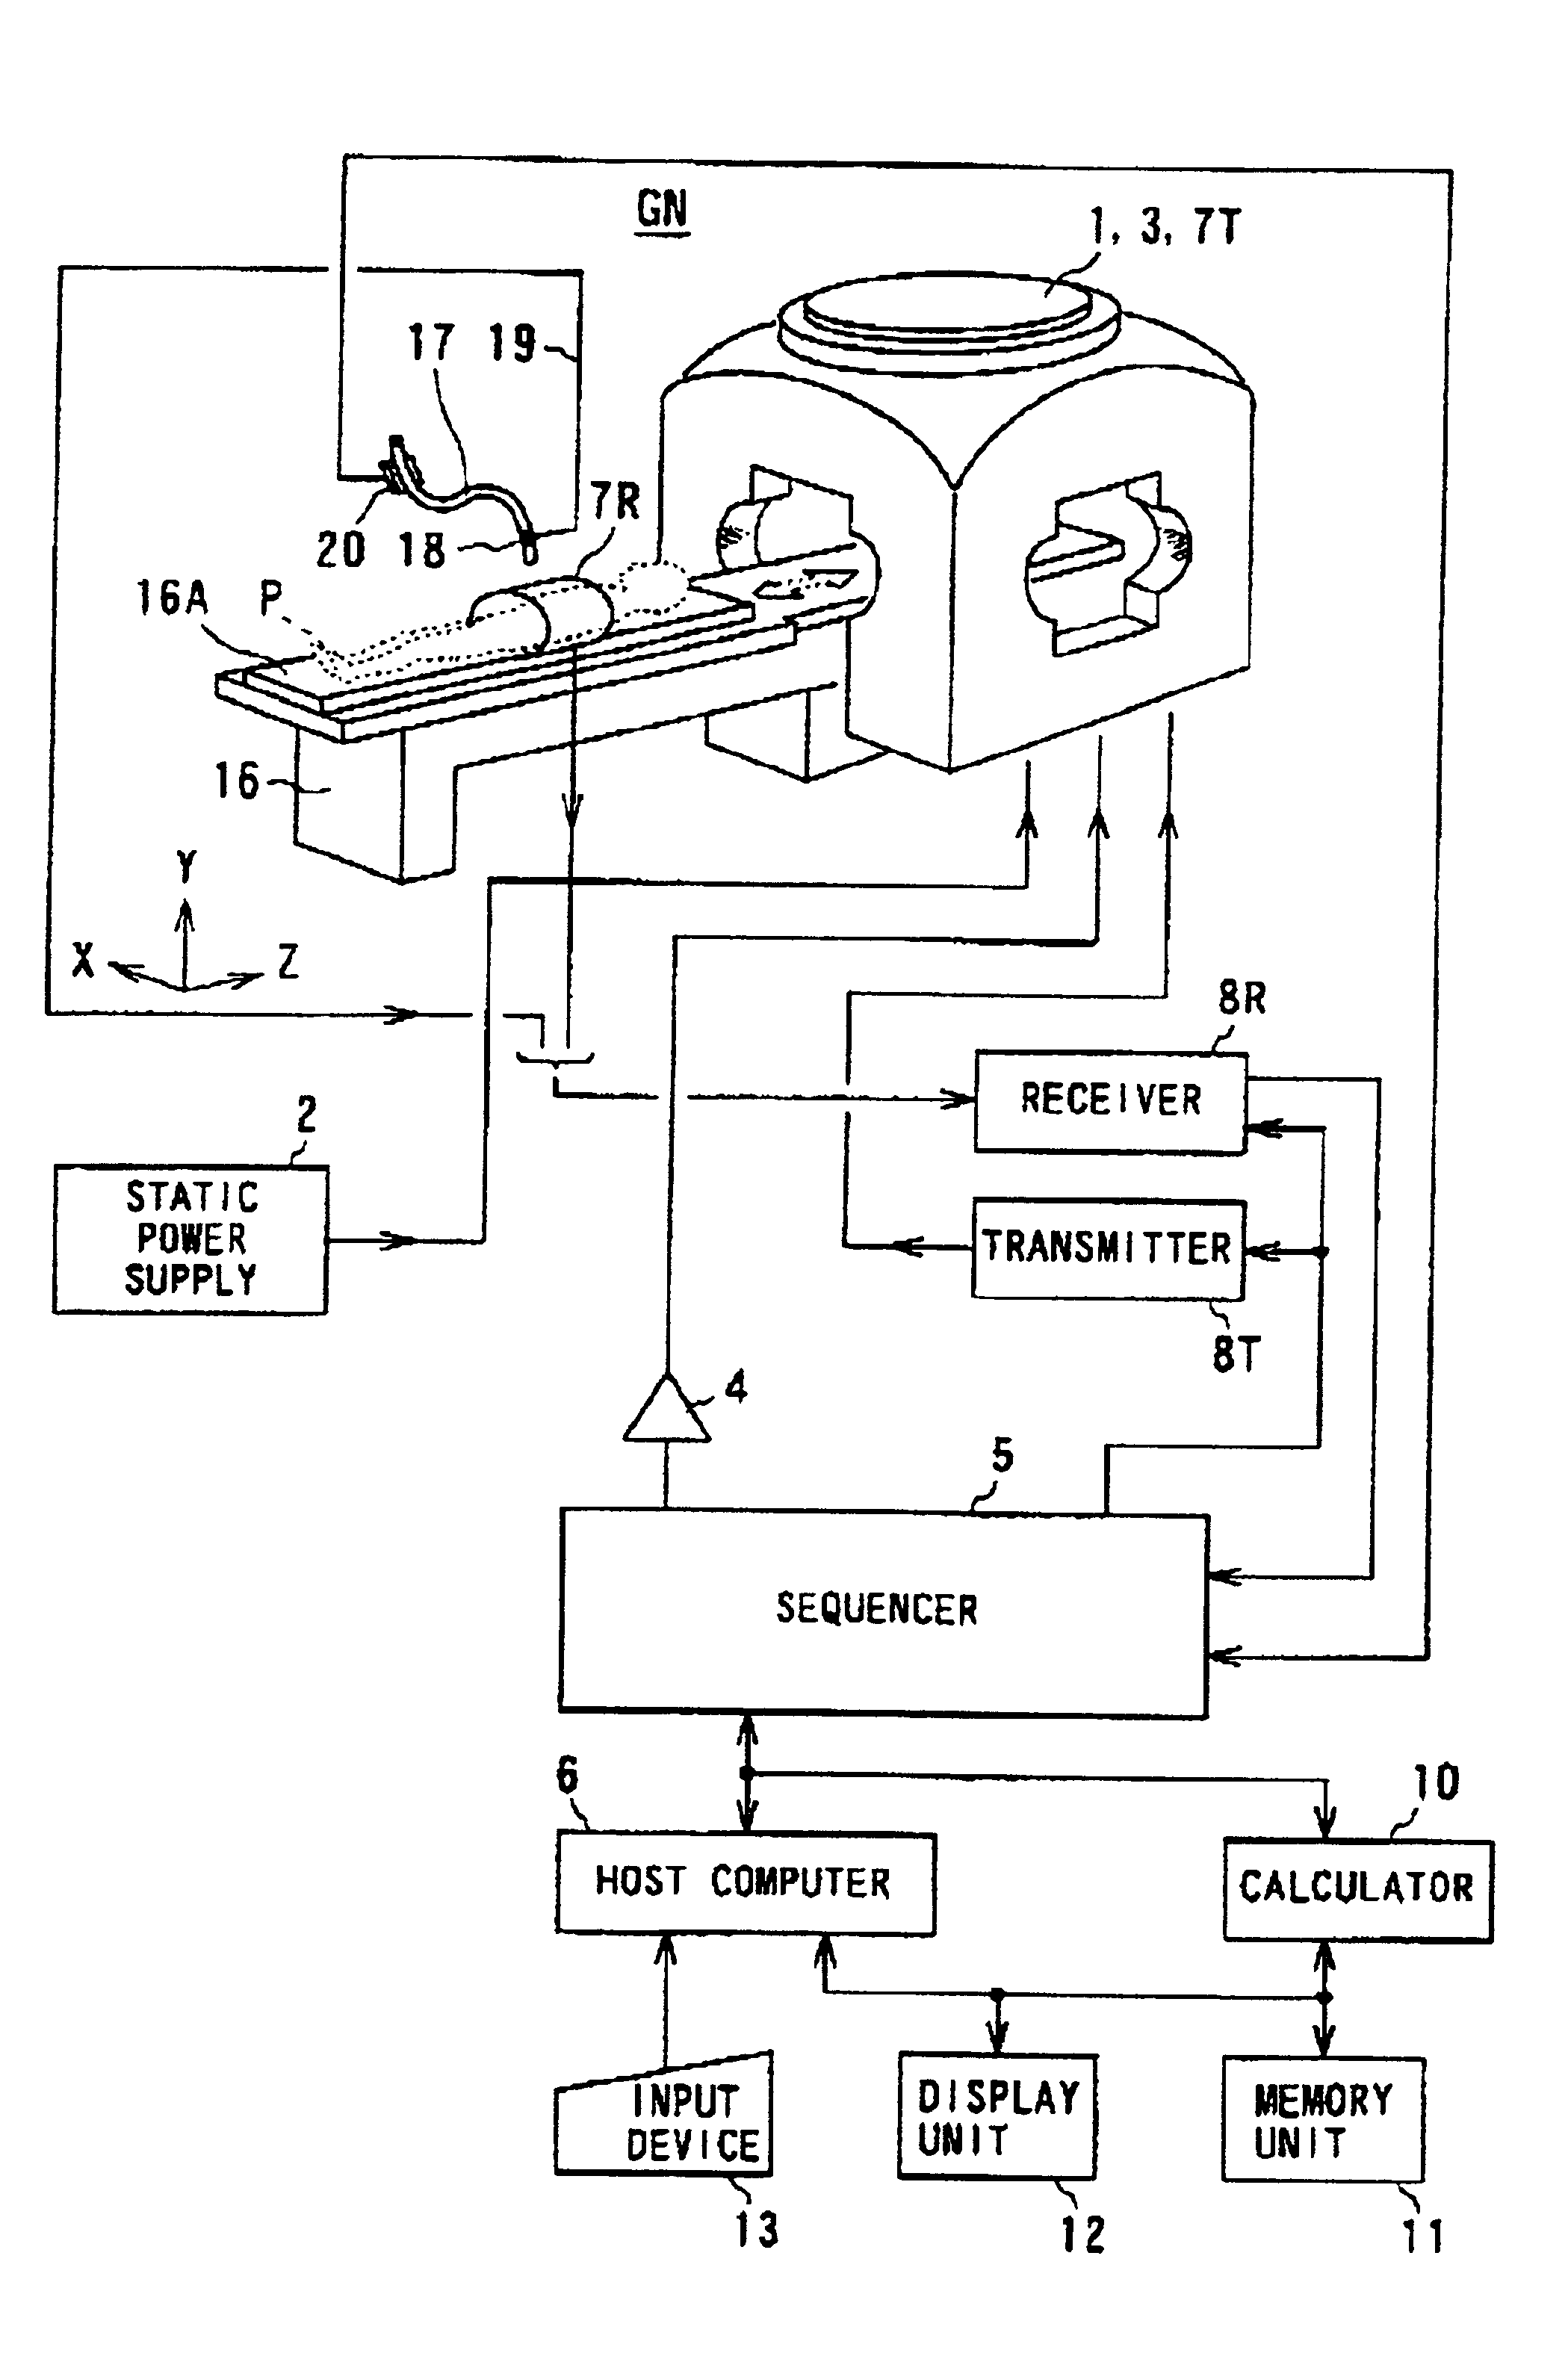 Interventional MR imaging with detection and display of device position